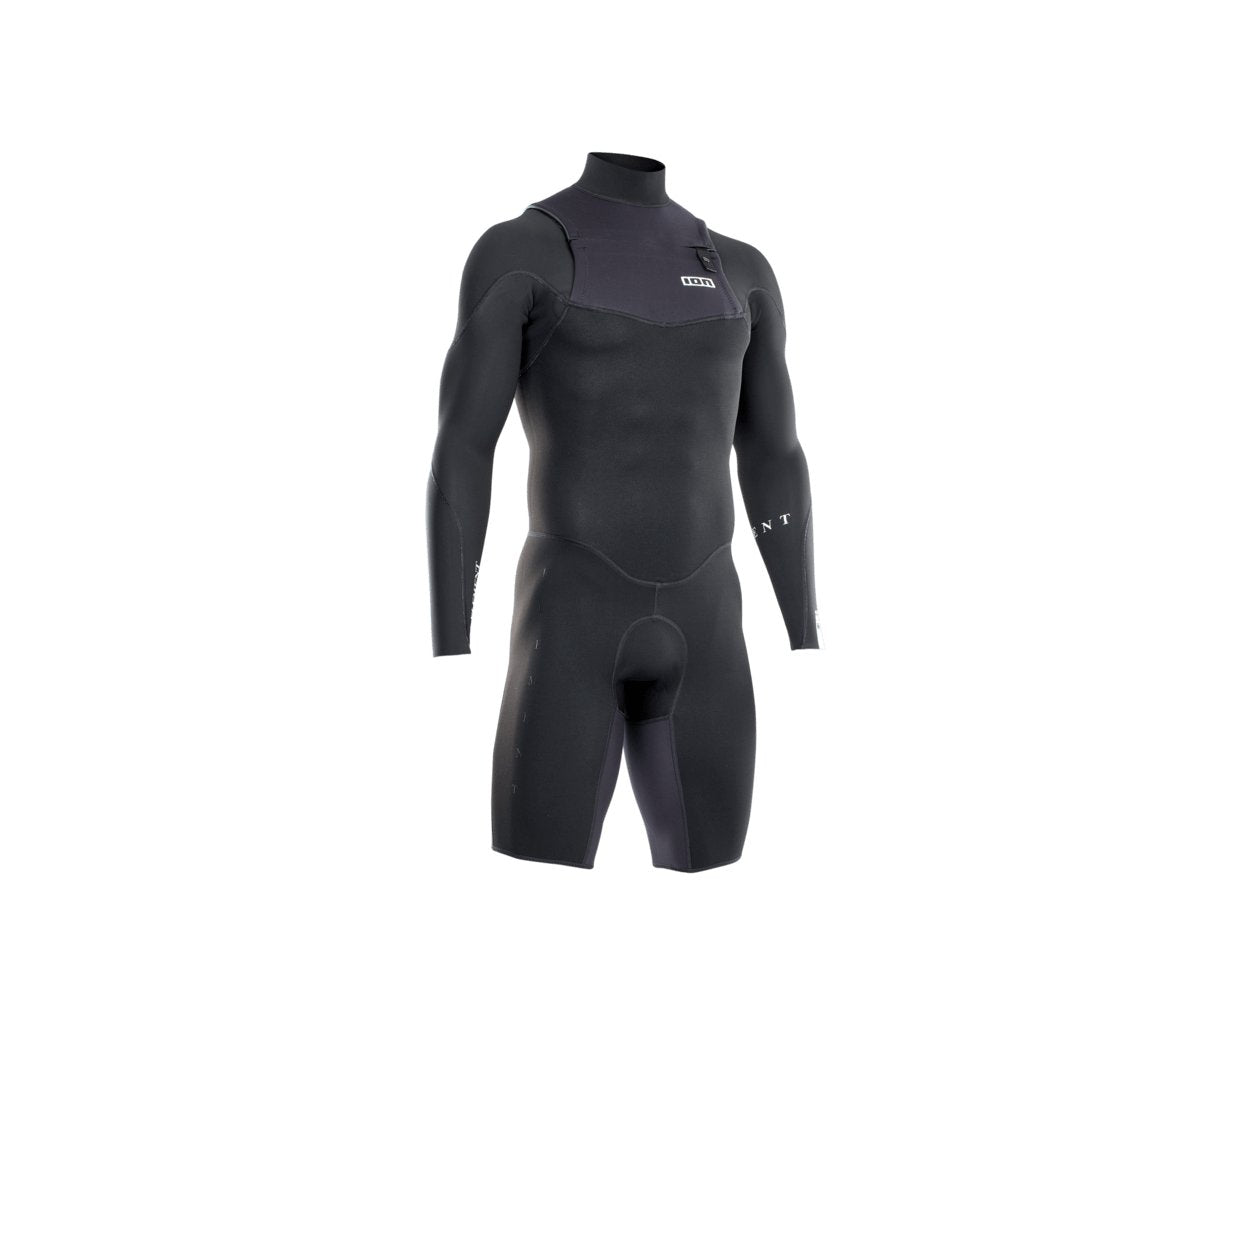 ION Men Wetsuit Element 2/2 Shorty Longsleeve Front Zip 2022 - Worthing Watersports - 9008415951024 - Wetsuits - ION Water